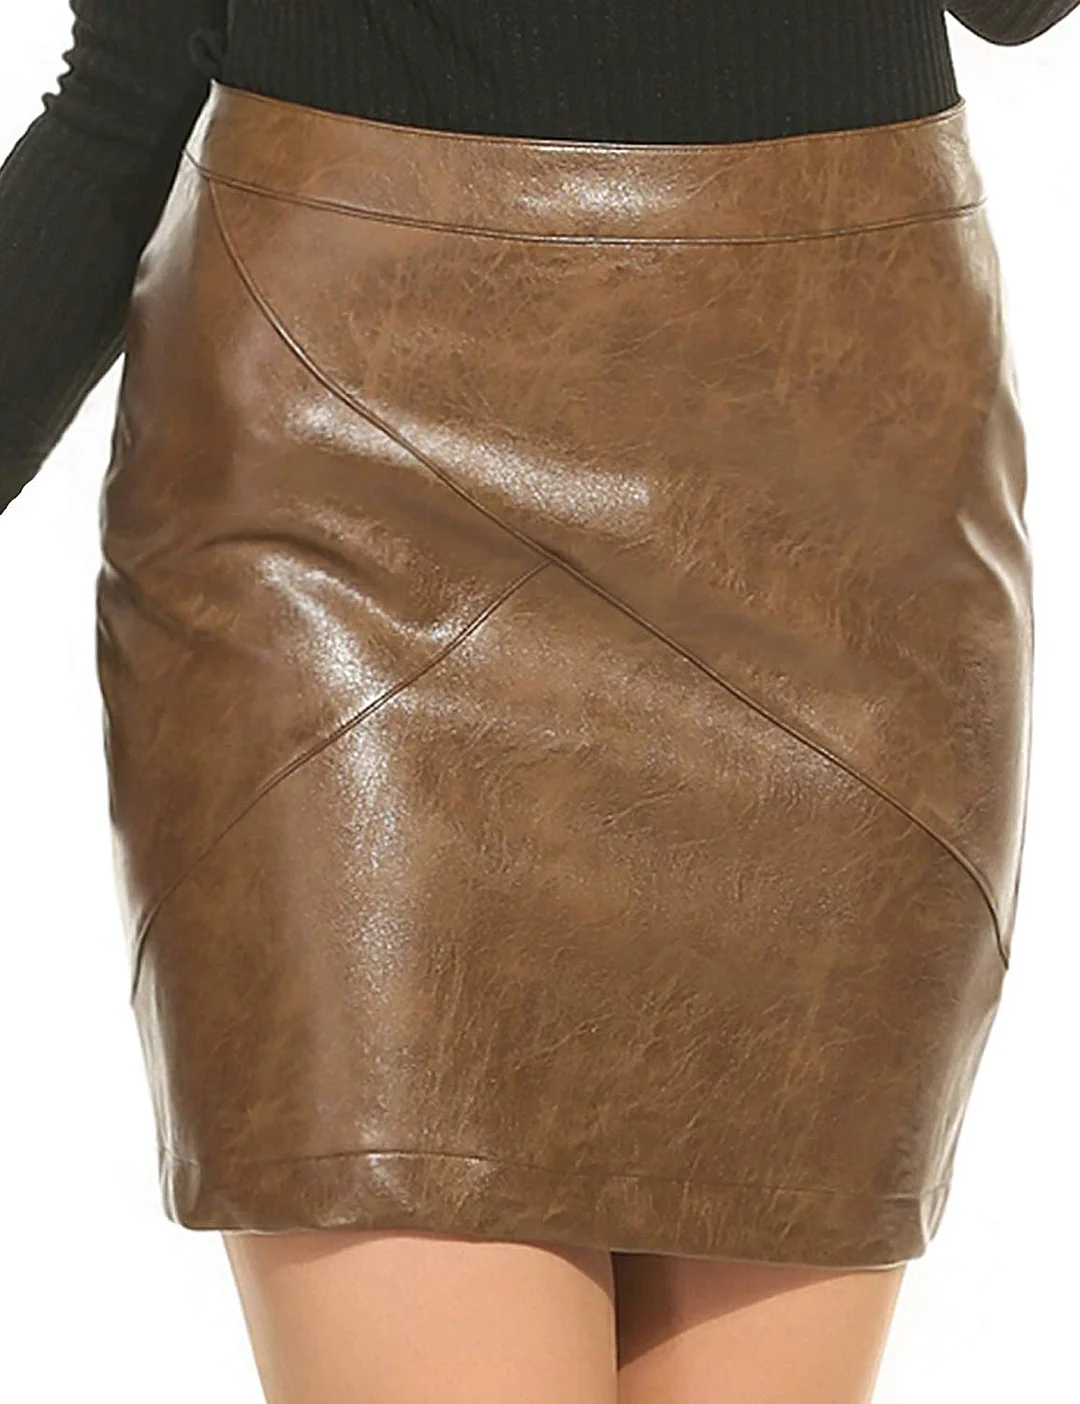 Women Classic High Waisted Faux Leather Bodycon Slim Mini Pencil Skirt